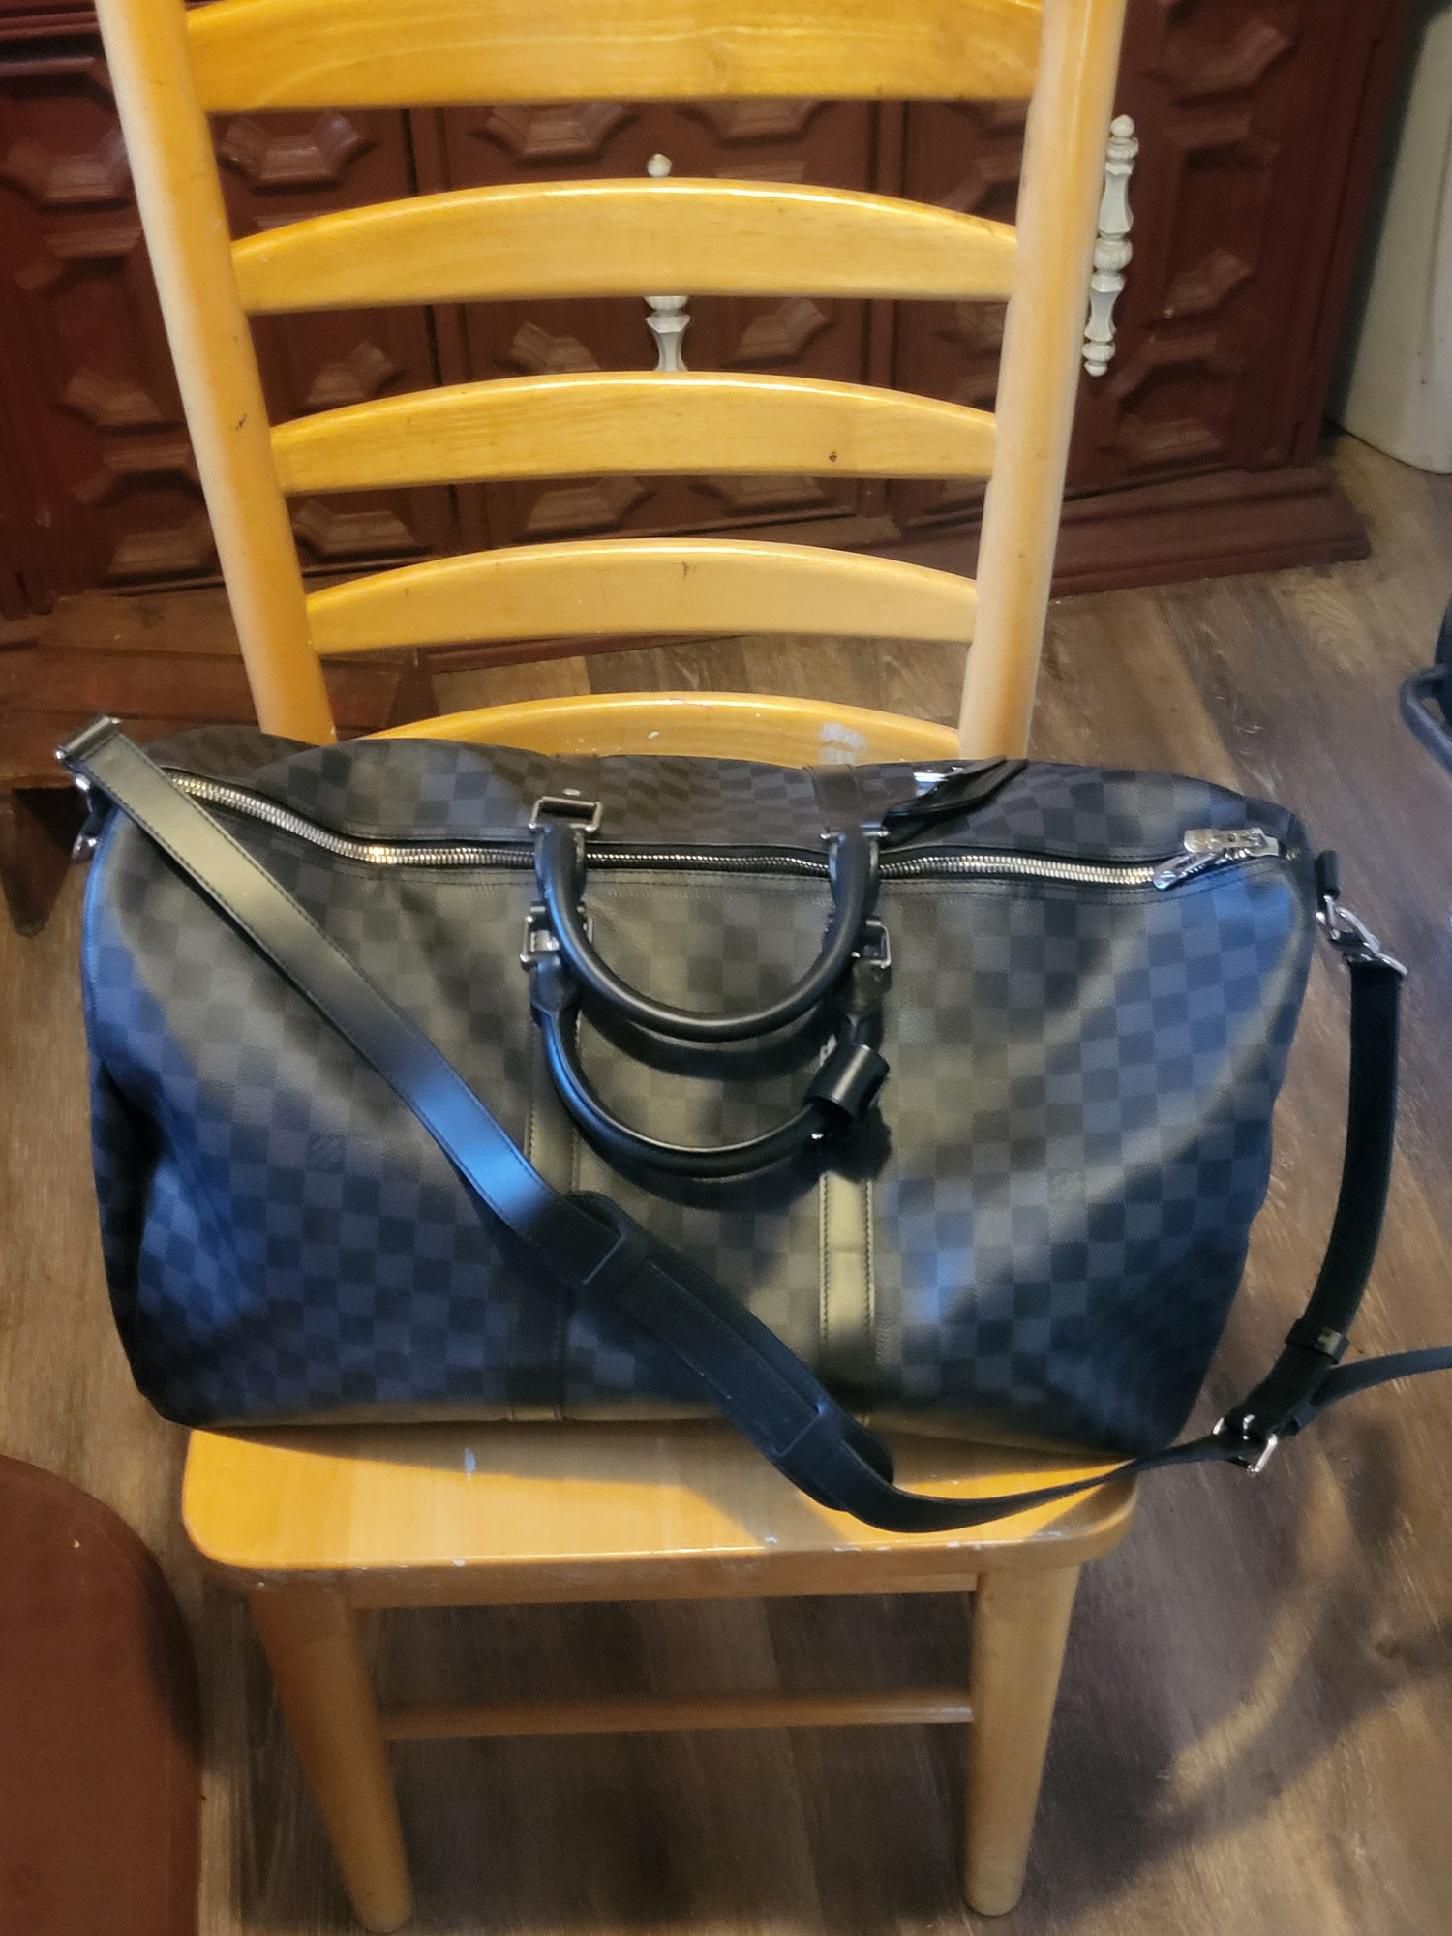 Vuitton Big Travel Bag for Sale in Selma, - OfferUp